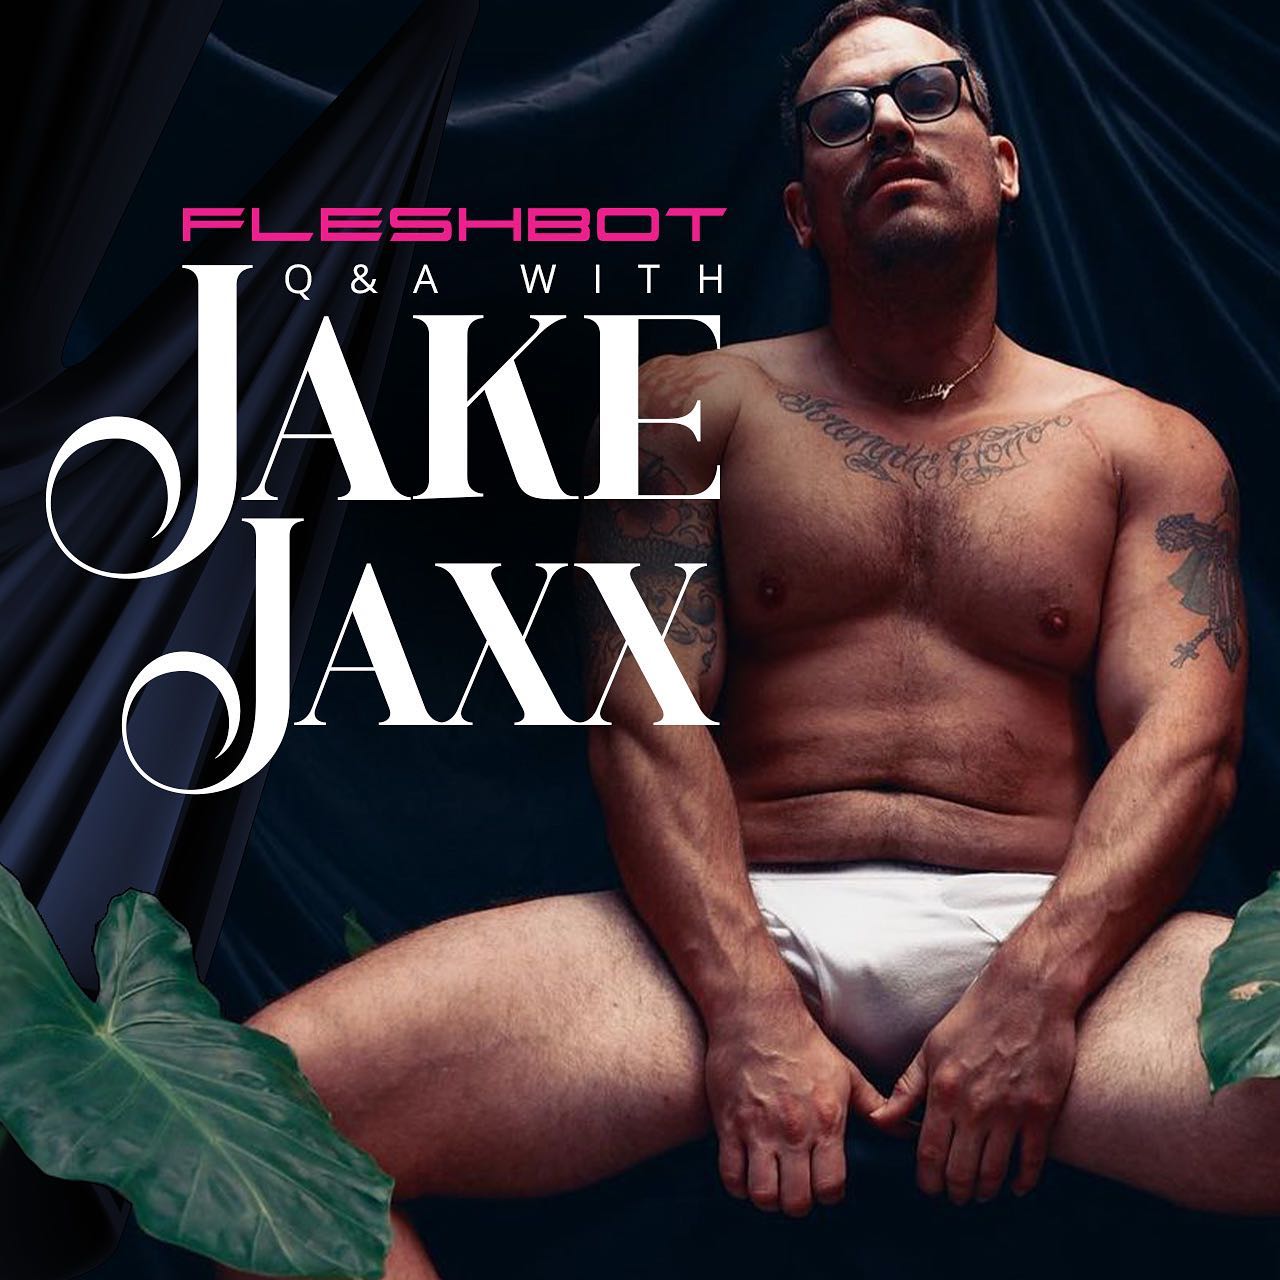 #Fleshbot Q&A ✨ @itsjakejaxx

He's the 🌽  internet's new favorite daddy and he's busting into studio work as well. Let's dive deep with the scorching star!

#gaystagram #gaymen #gaymenofinstagram #gays #lgbtq #queer